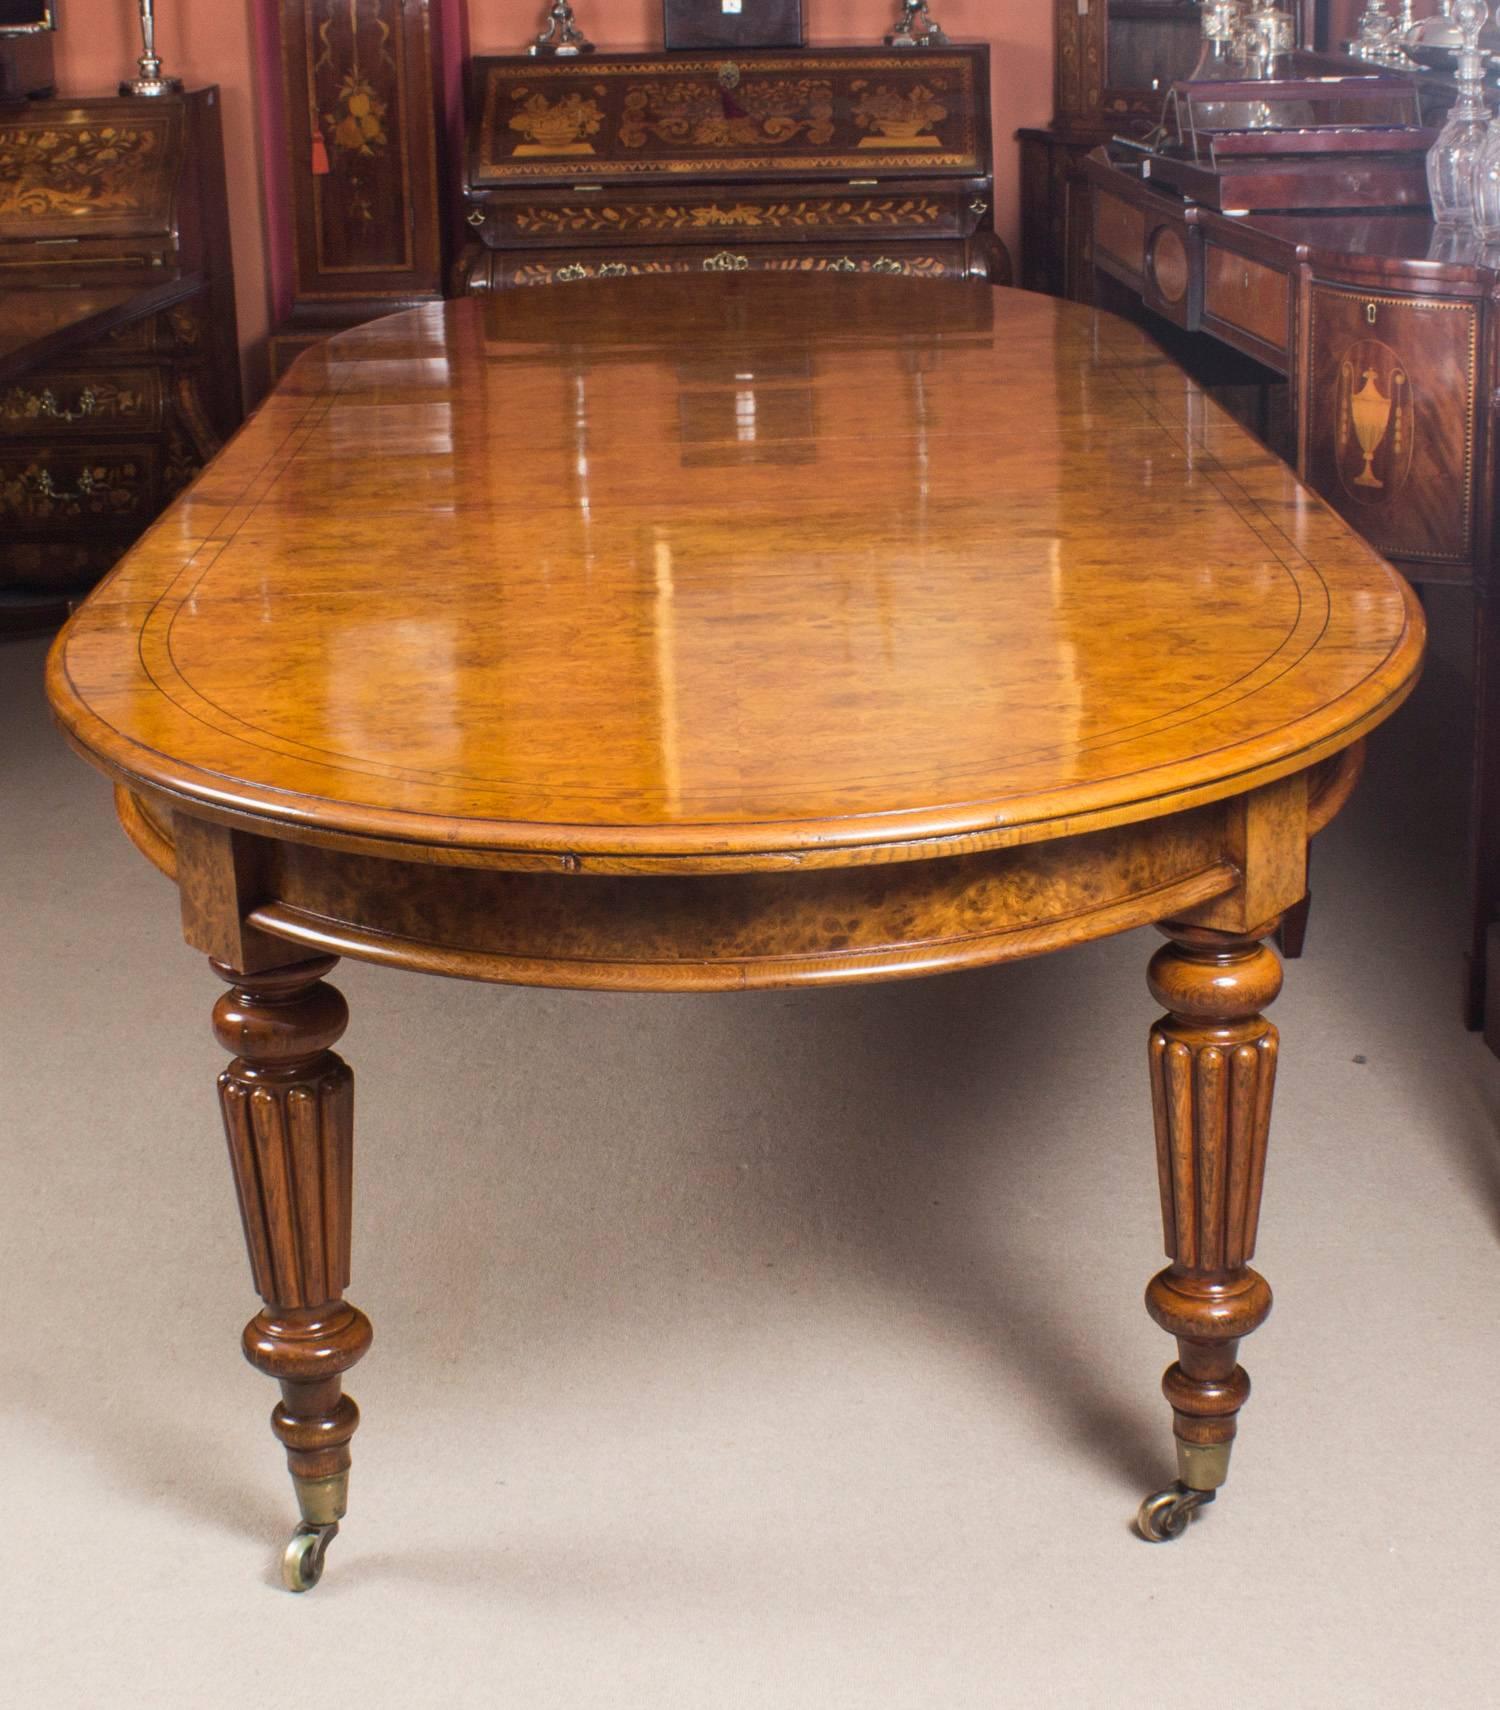 Mid-19th Century Antique Victorian Pollard Oak Extending Dining Table Early 19th Century